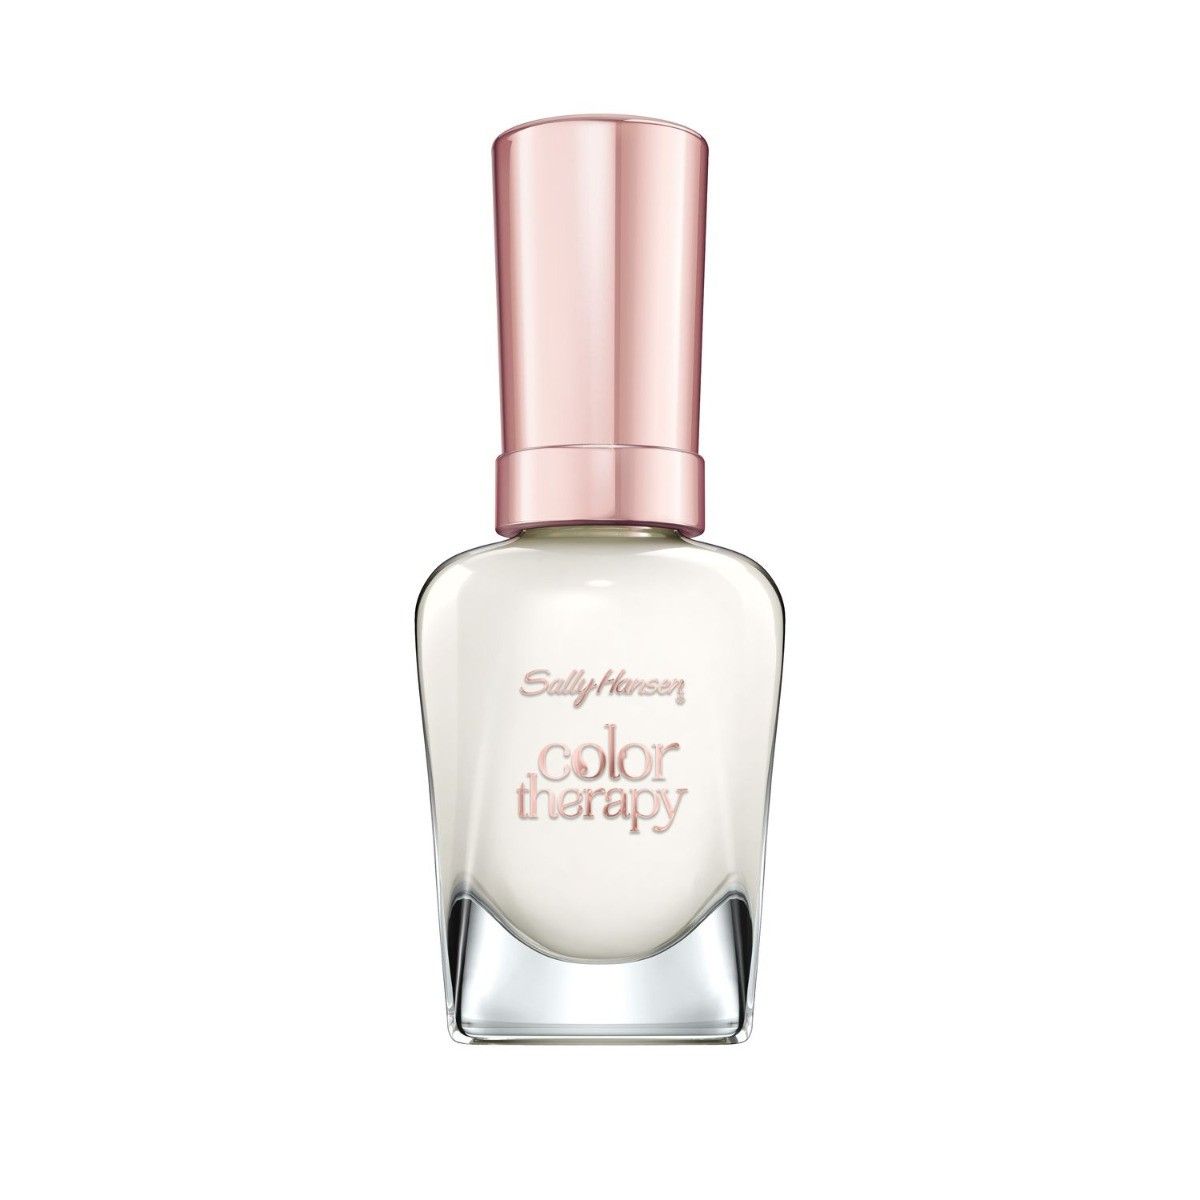 Sally Hansen Color Therapy лак для ногтей, 110 Well, Well, Well well knownold